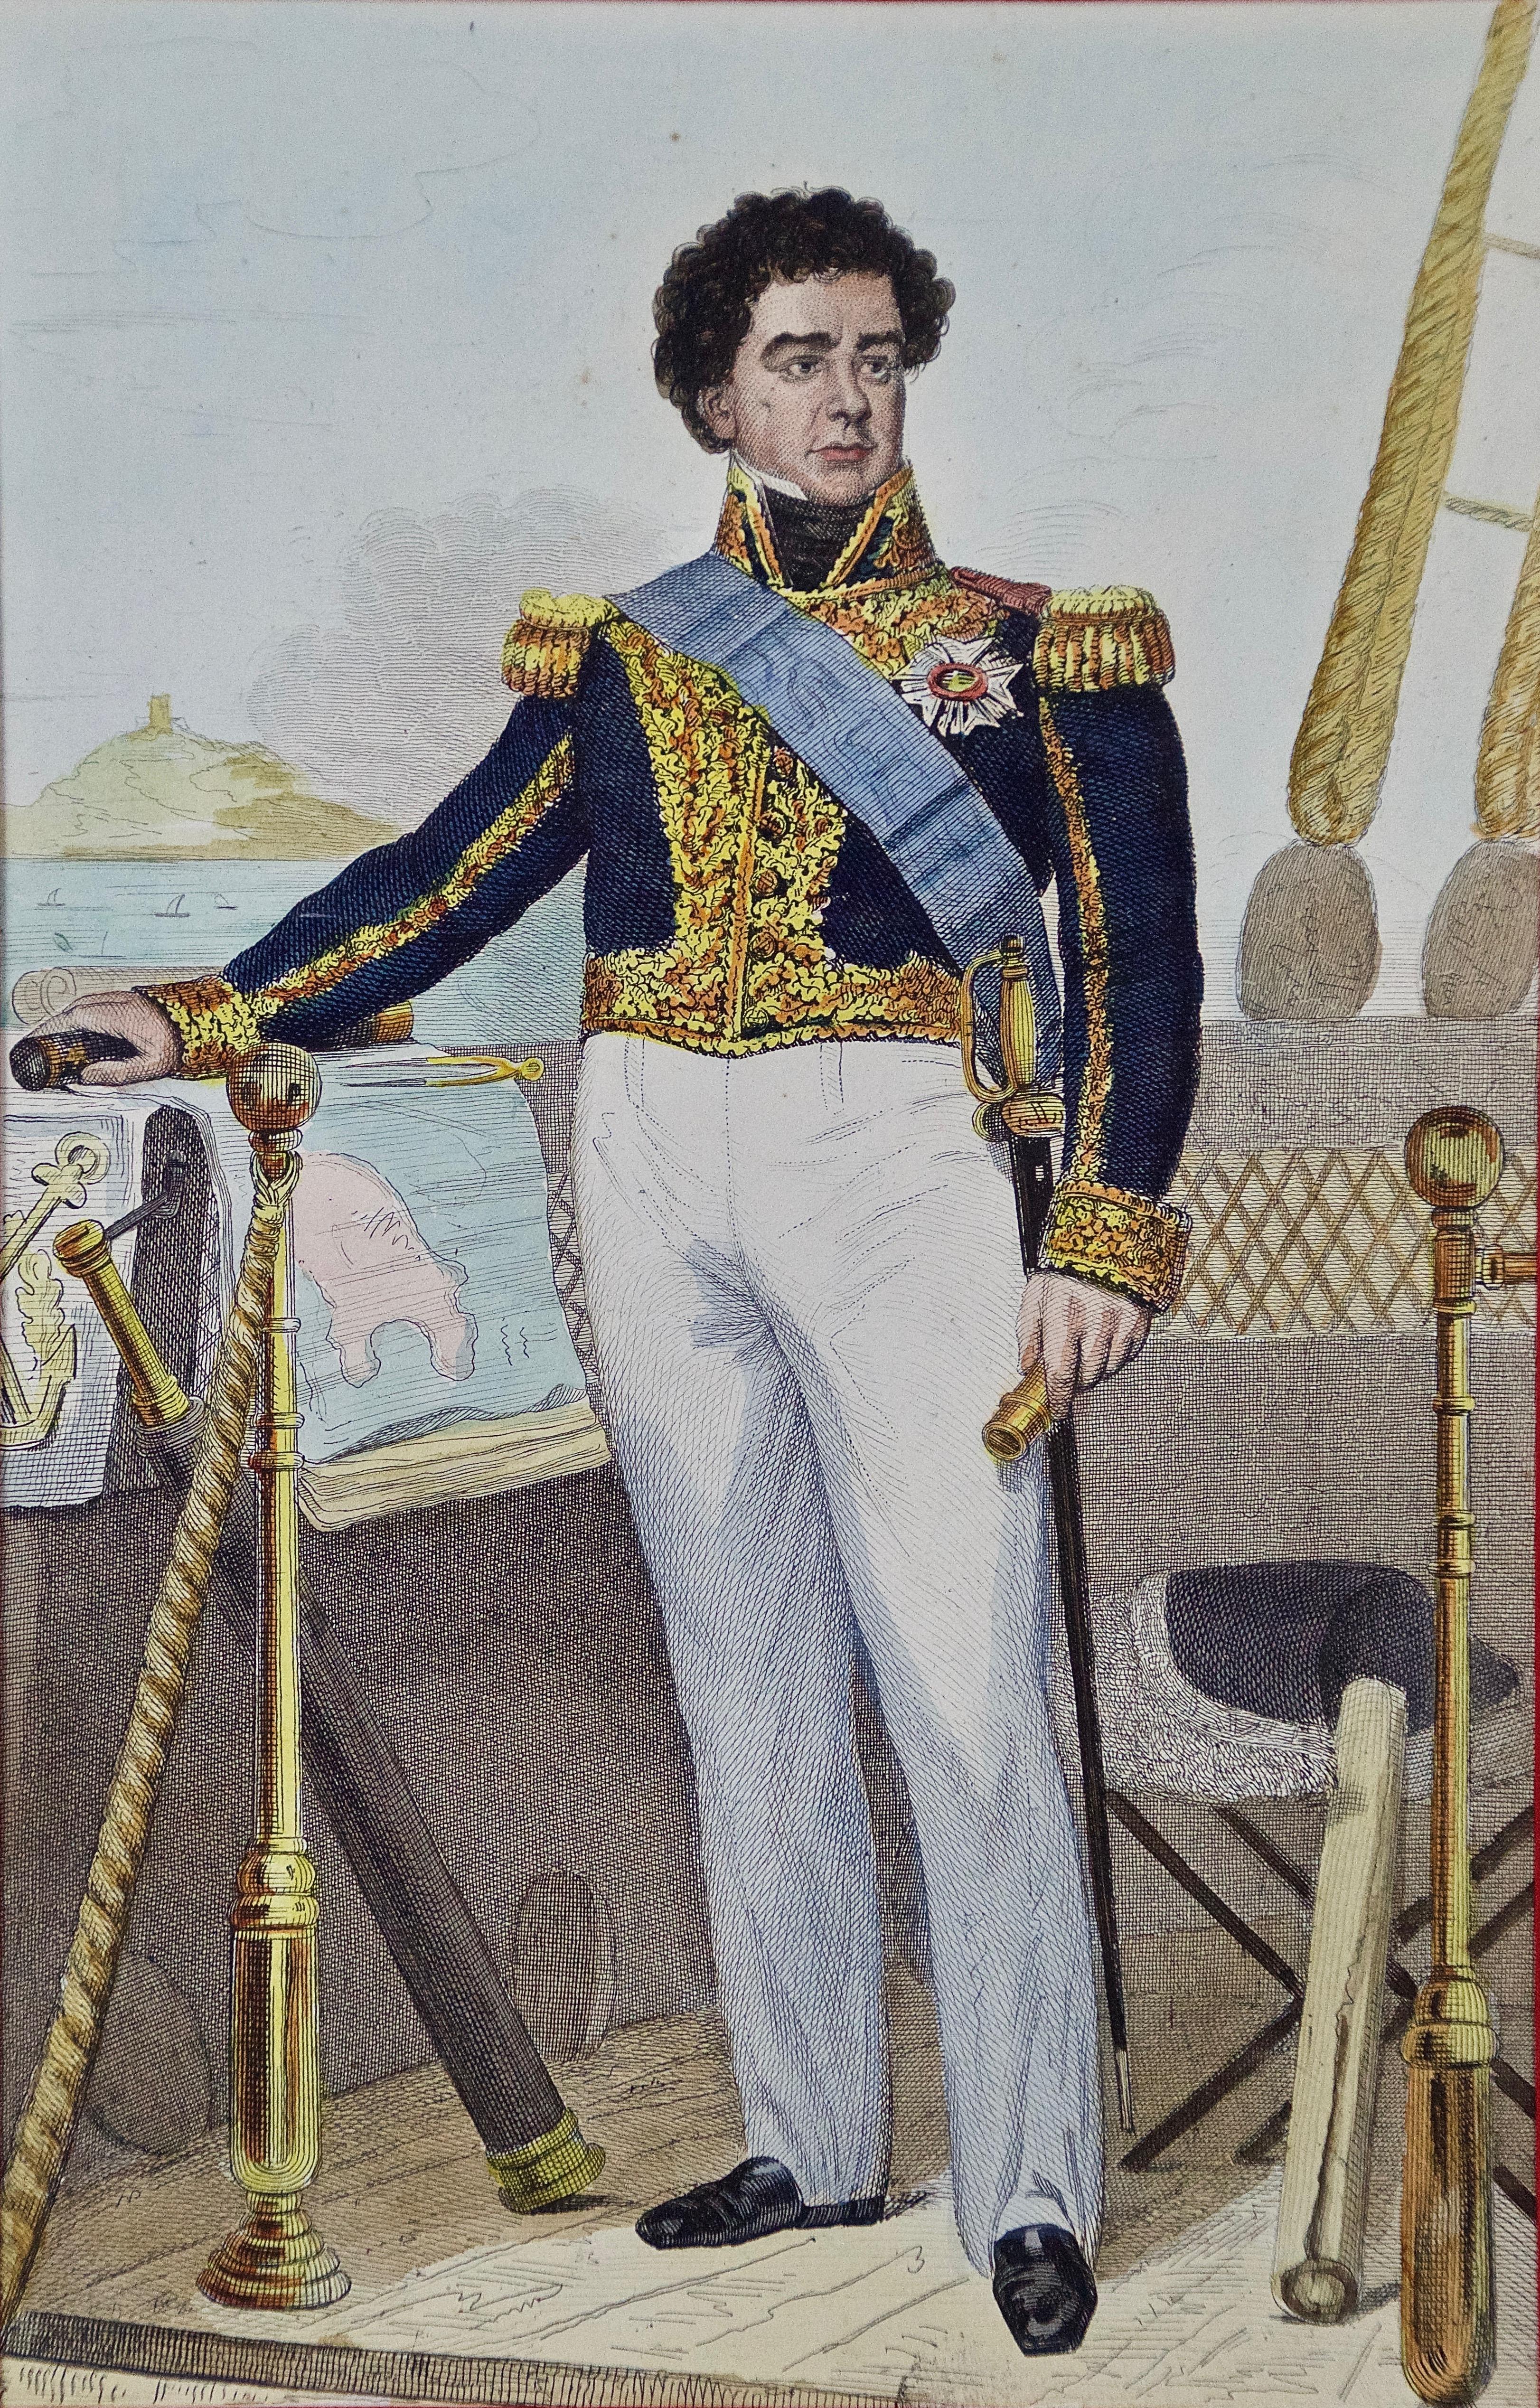 Antique Hand Colored Steel Engraving of the Commodore of the Navy under Napoleon - Print by Joseph-Désiré Court